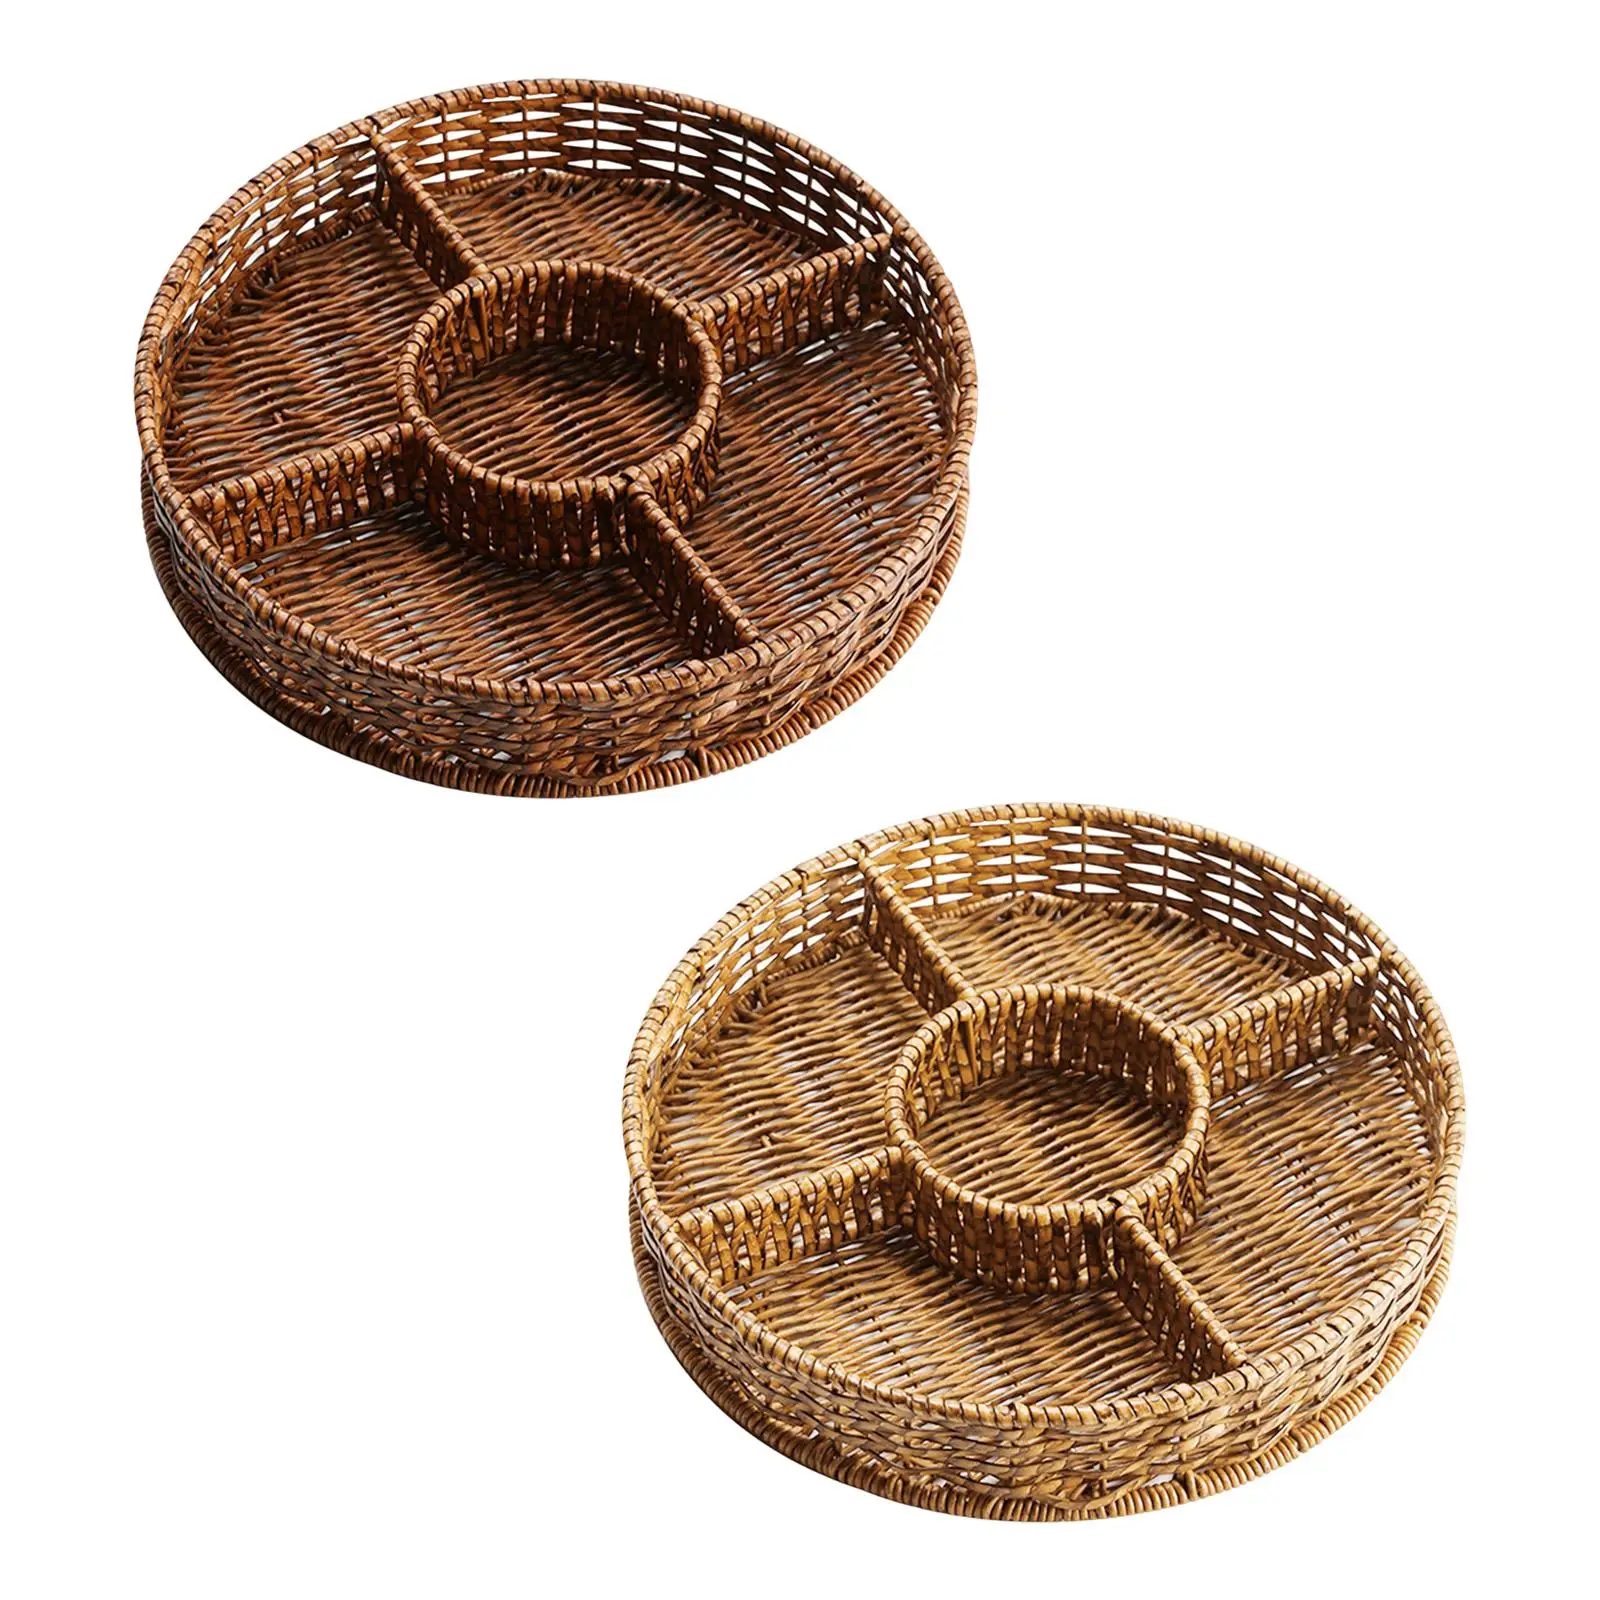 Round Woven Serving Tray Food Basket Imitation Rattan Woven Tray for Bathroom Dining Room